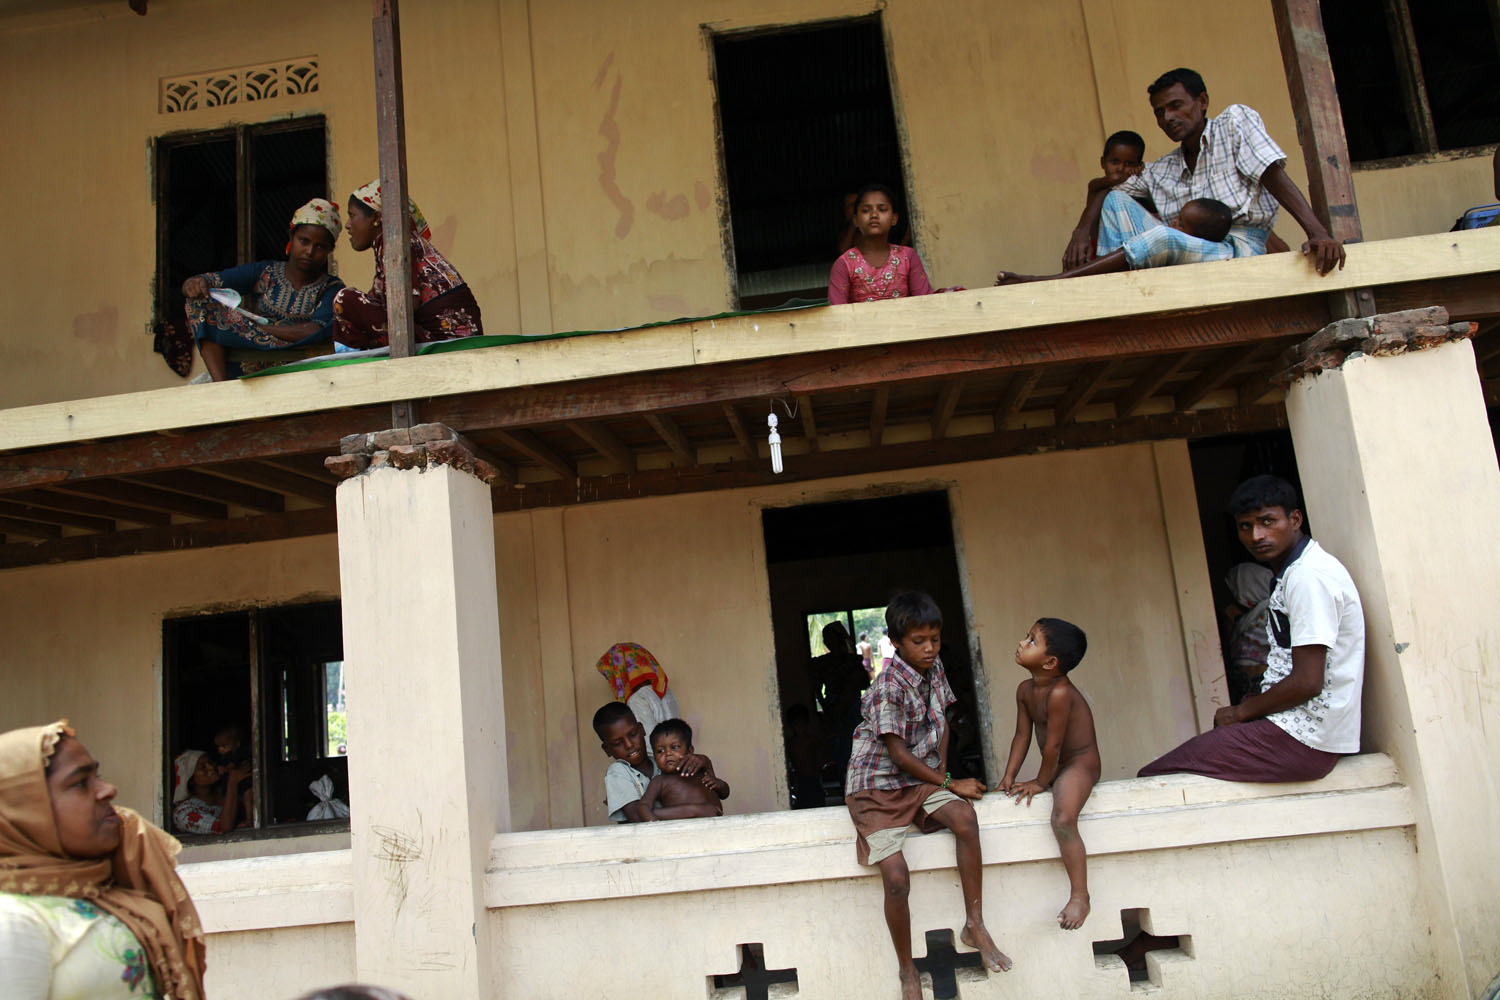 People pass time in a mosque, where they were evacuated to shelter from cyclone Mahasen when it landed, outside of Sittwe